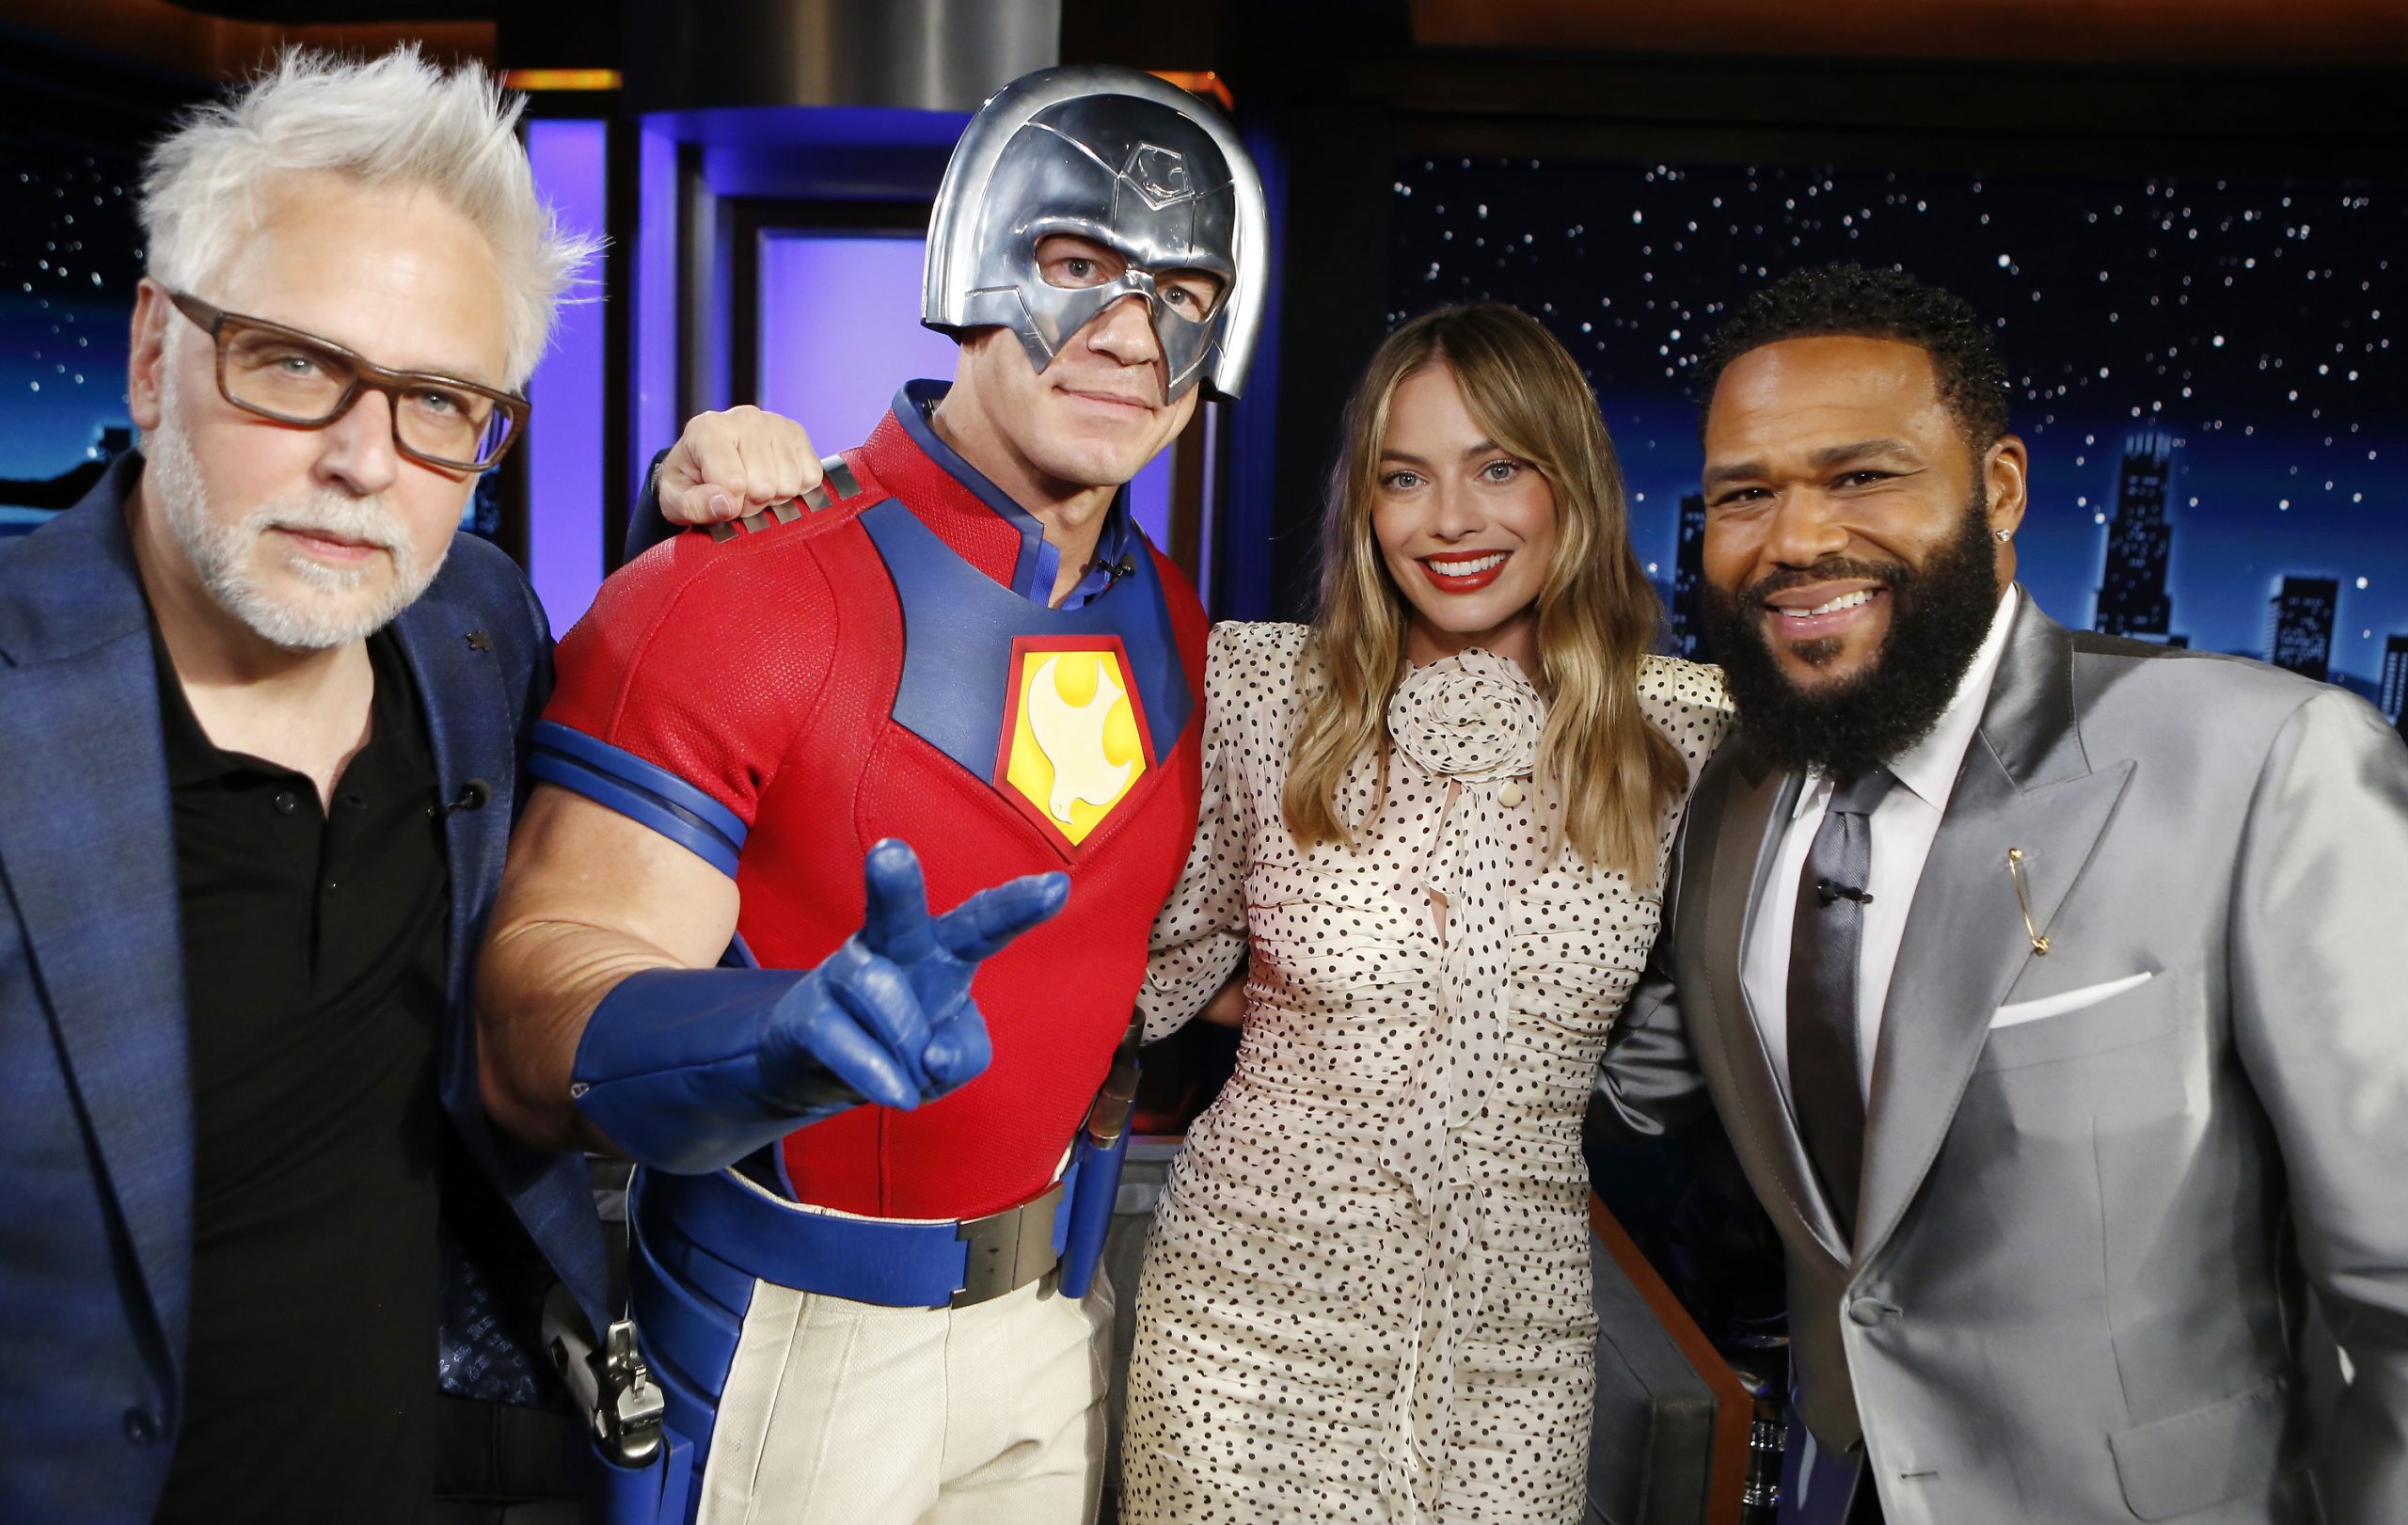 In Case You Missed It: The Cast Of ‘The Suicide Squad’ Margot Robbie, John Cena And James Gunn Stop By ‘Jimmy Kimmel Live’